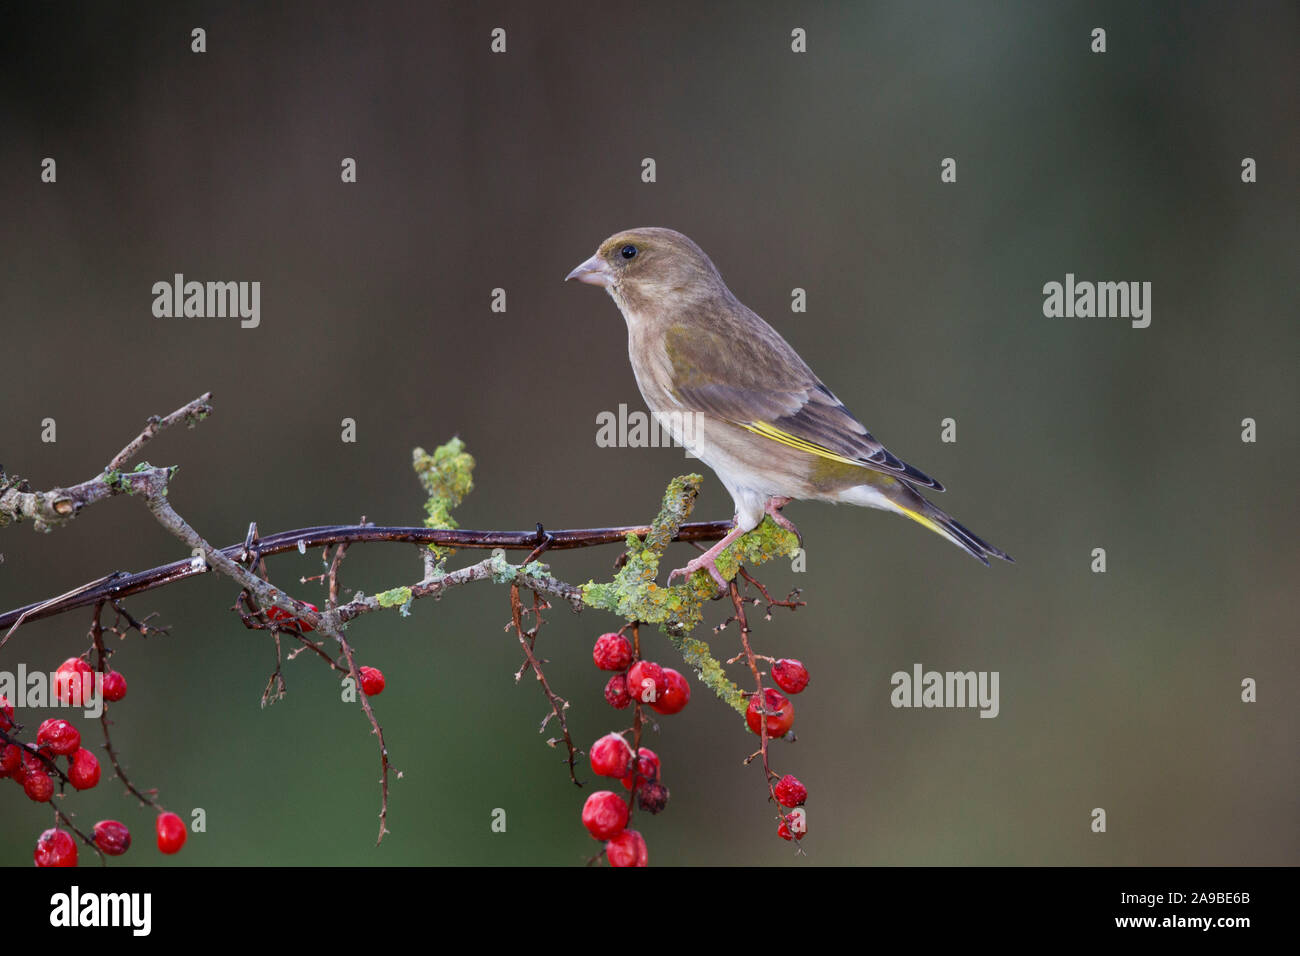 Greenfinch, Carduelis chloris, on a berry laden branch in Autumn, Wales Stock Photo